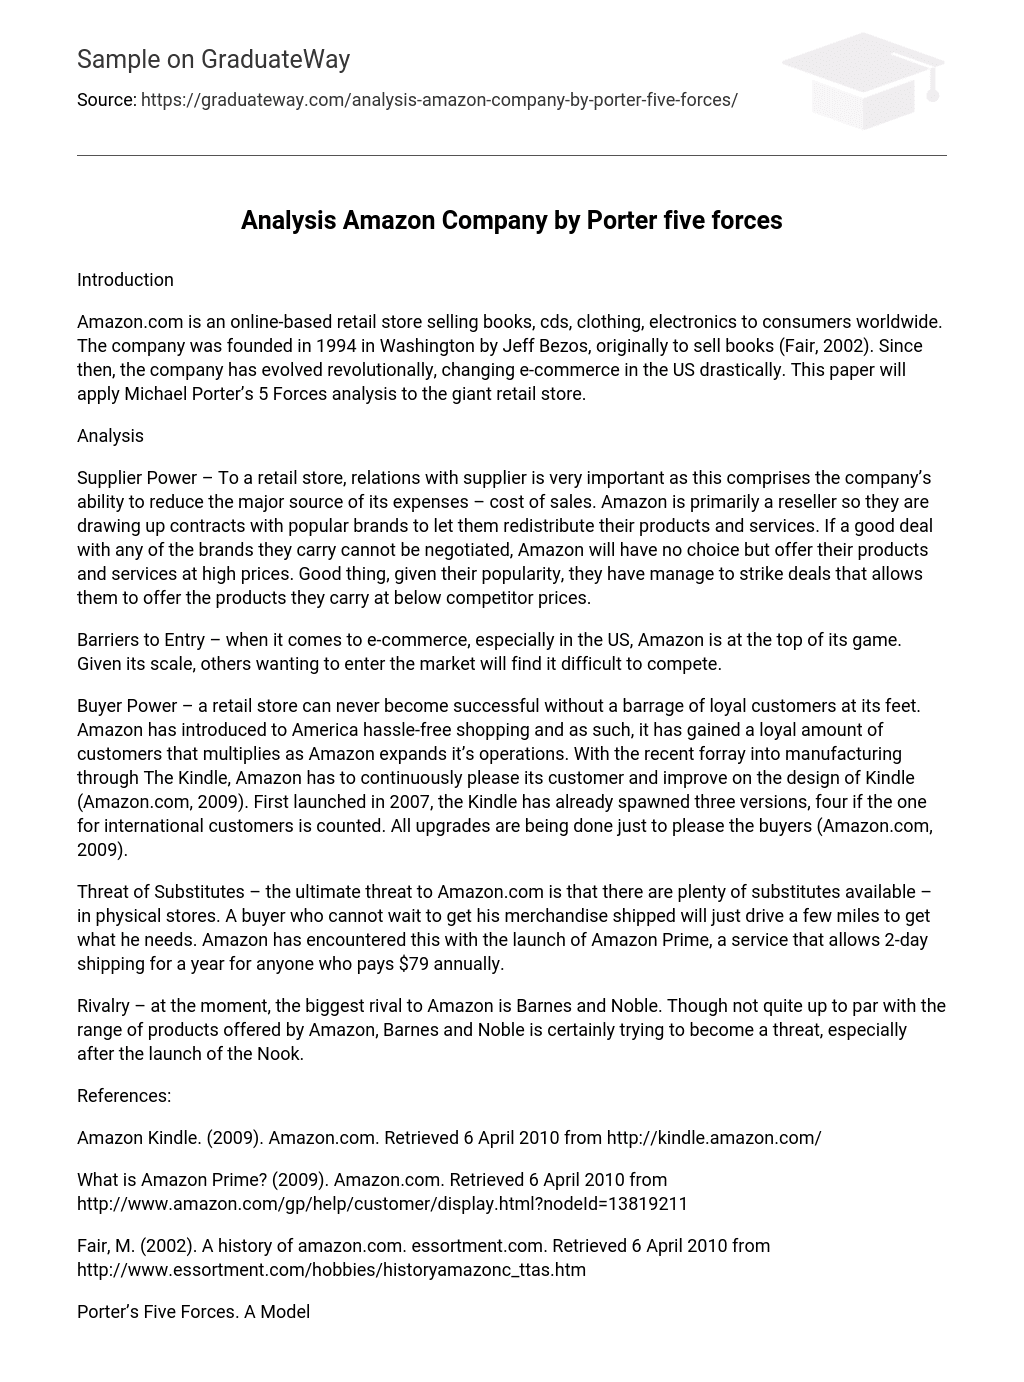 Analysis Amazon Company by Porter five forces